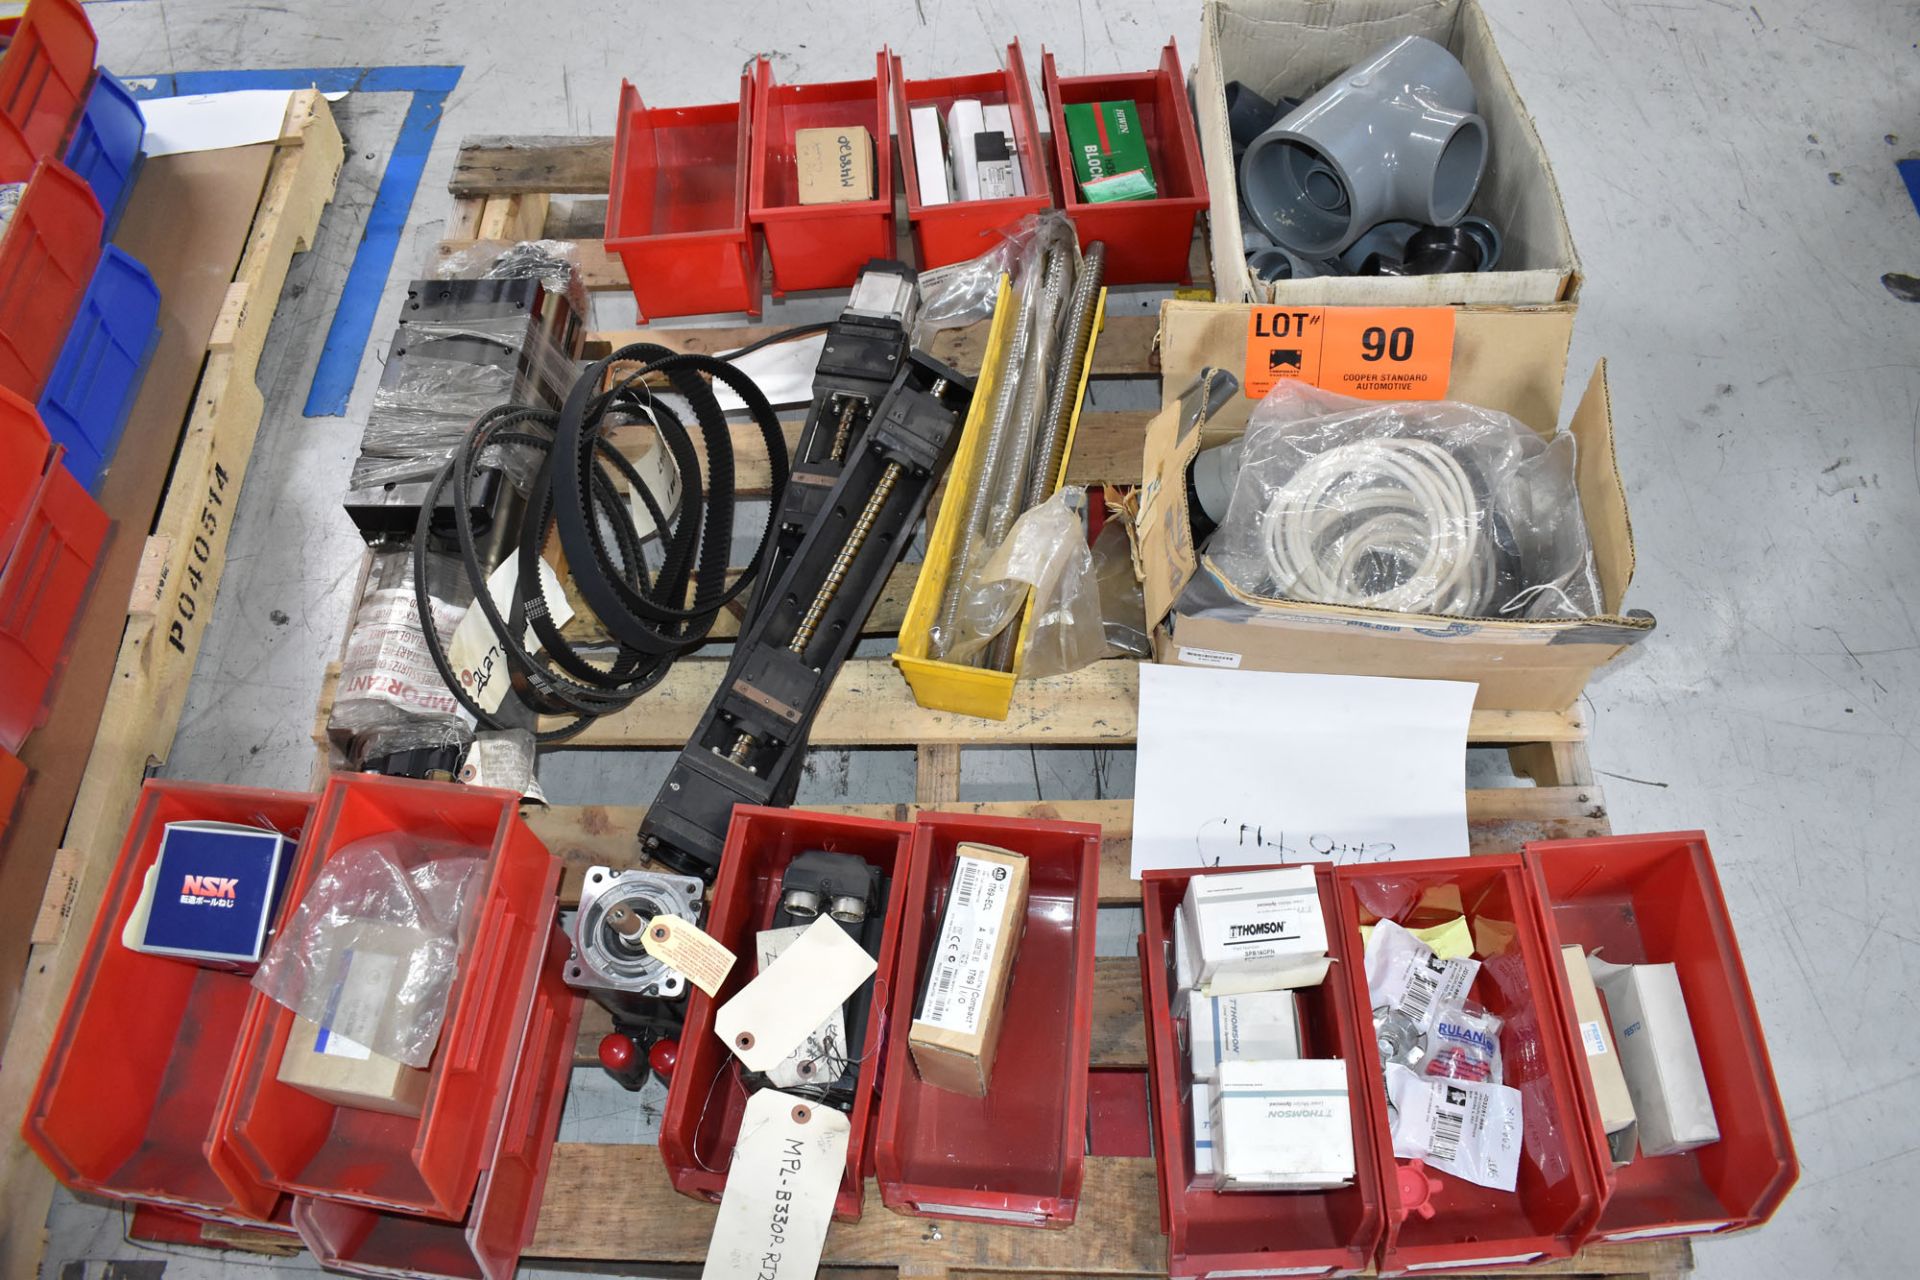 LOT/ PALLET WITH CONTENTS CONSISTING OF FITTINGS, HARDWARE, AND EXTRUDER LINE COMPONENTS [RIGGING